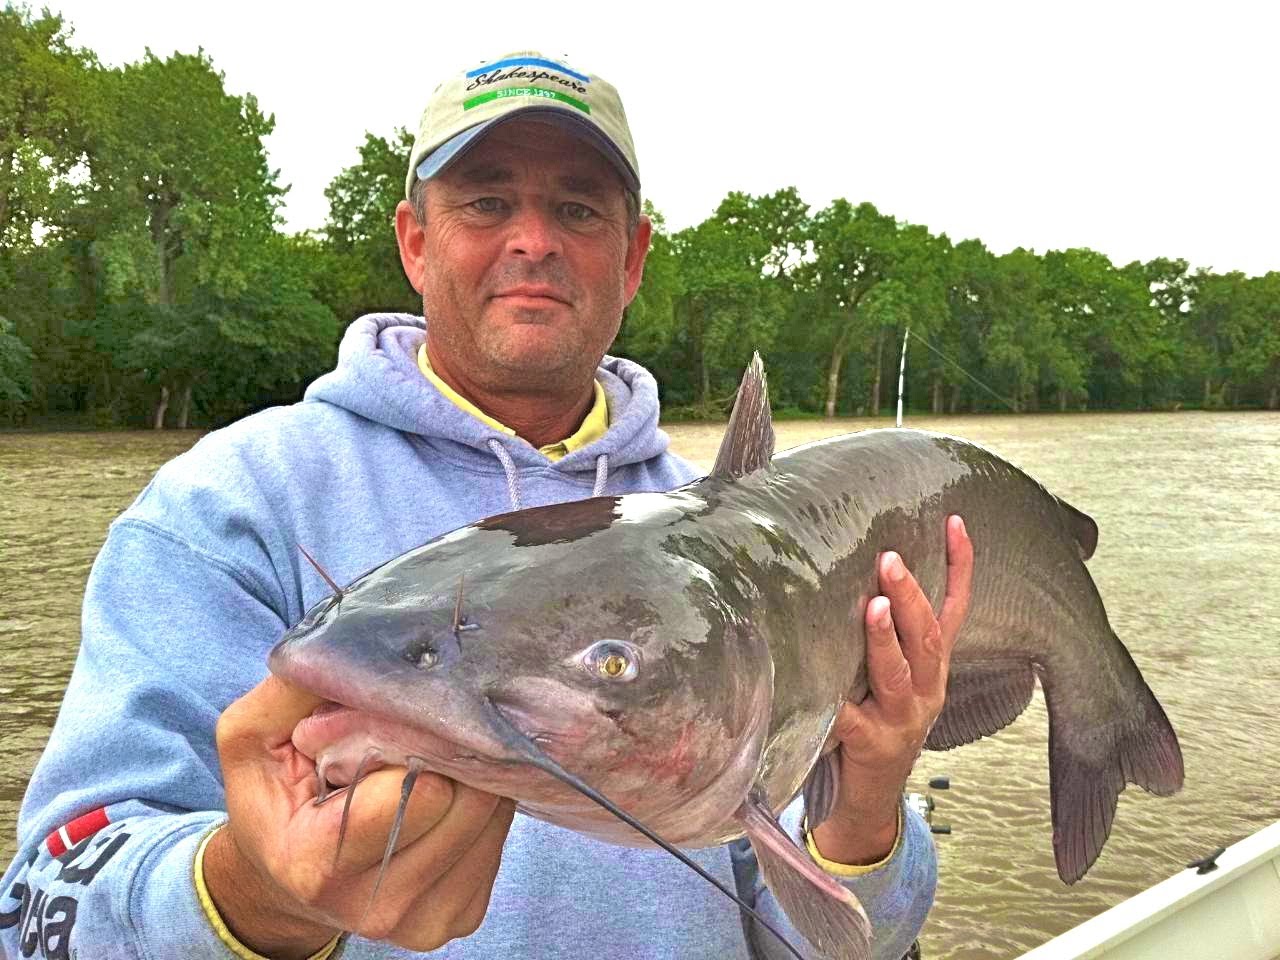 Here is the Best Catfish Rods - G3 Sportsman